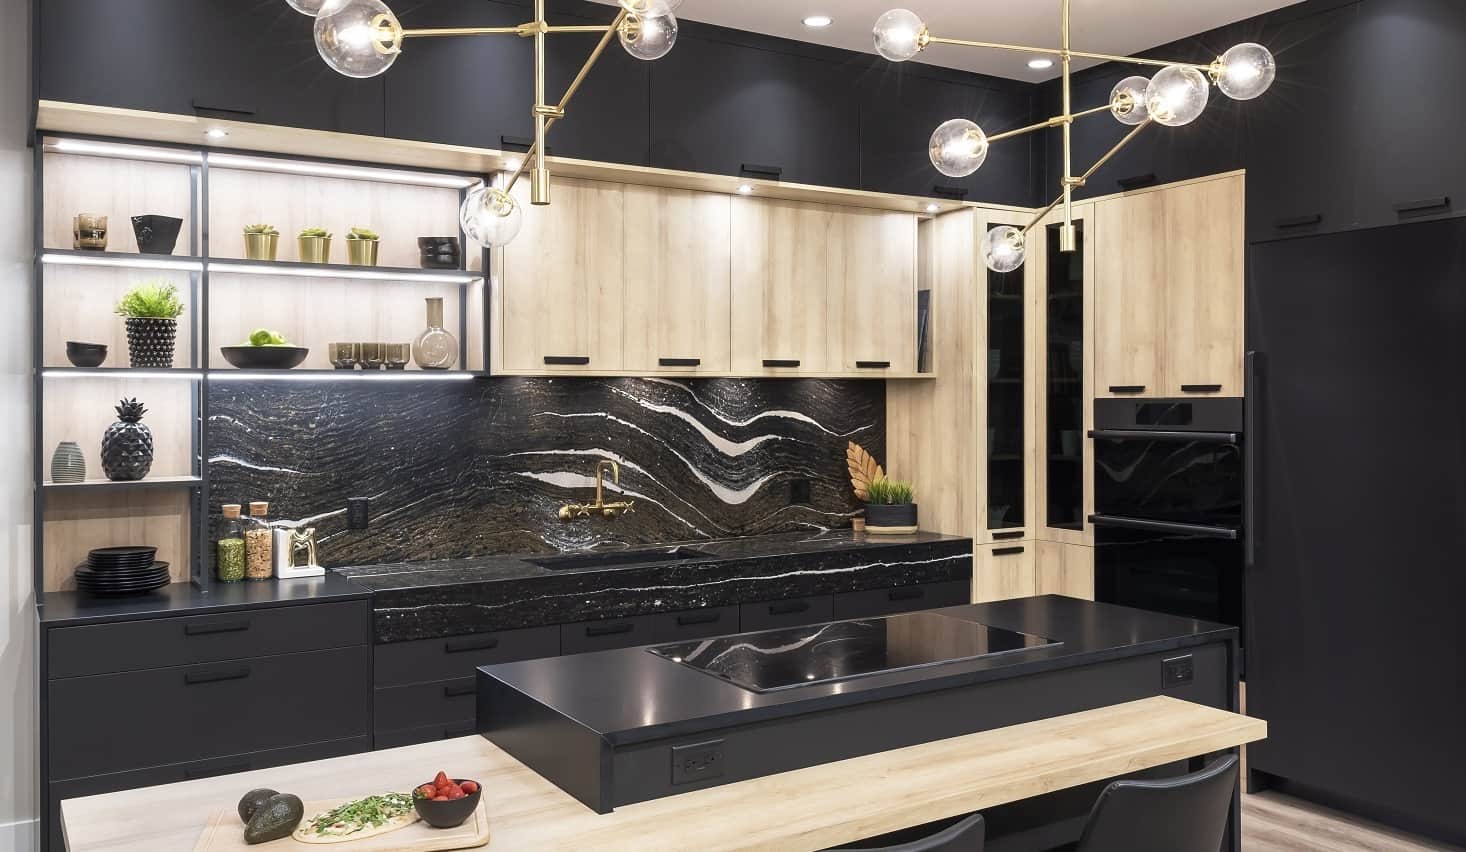 Laminate Kitchen Cabinetry with Modern Design for American Kitchen